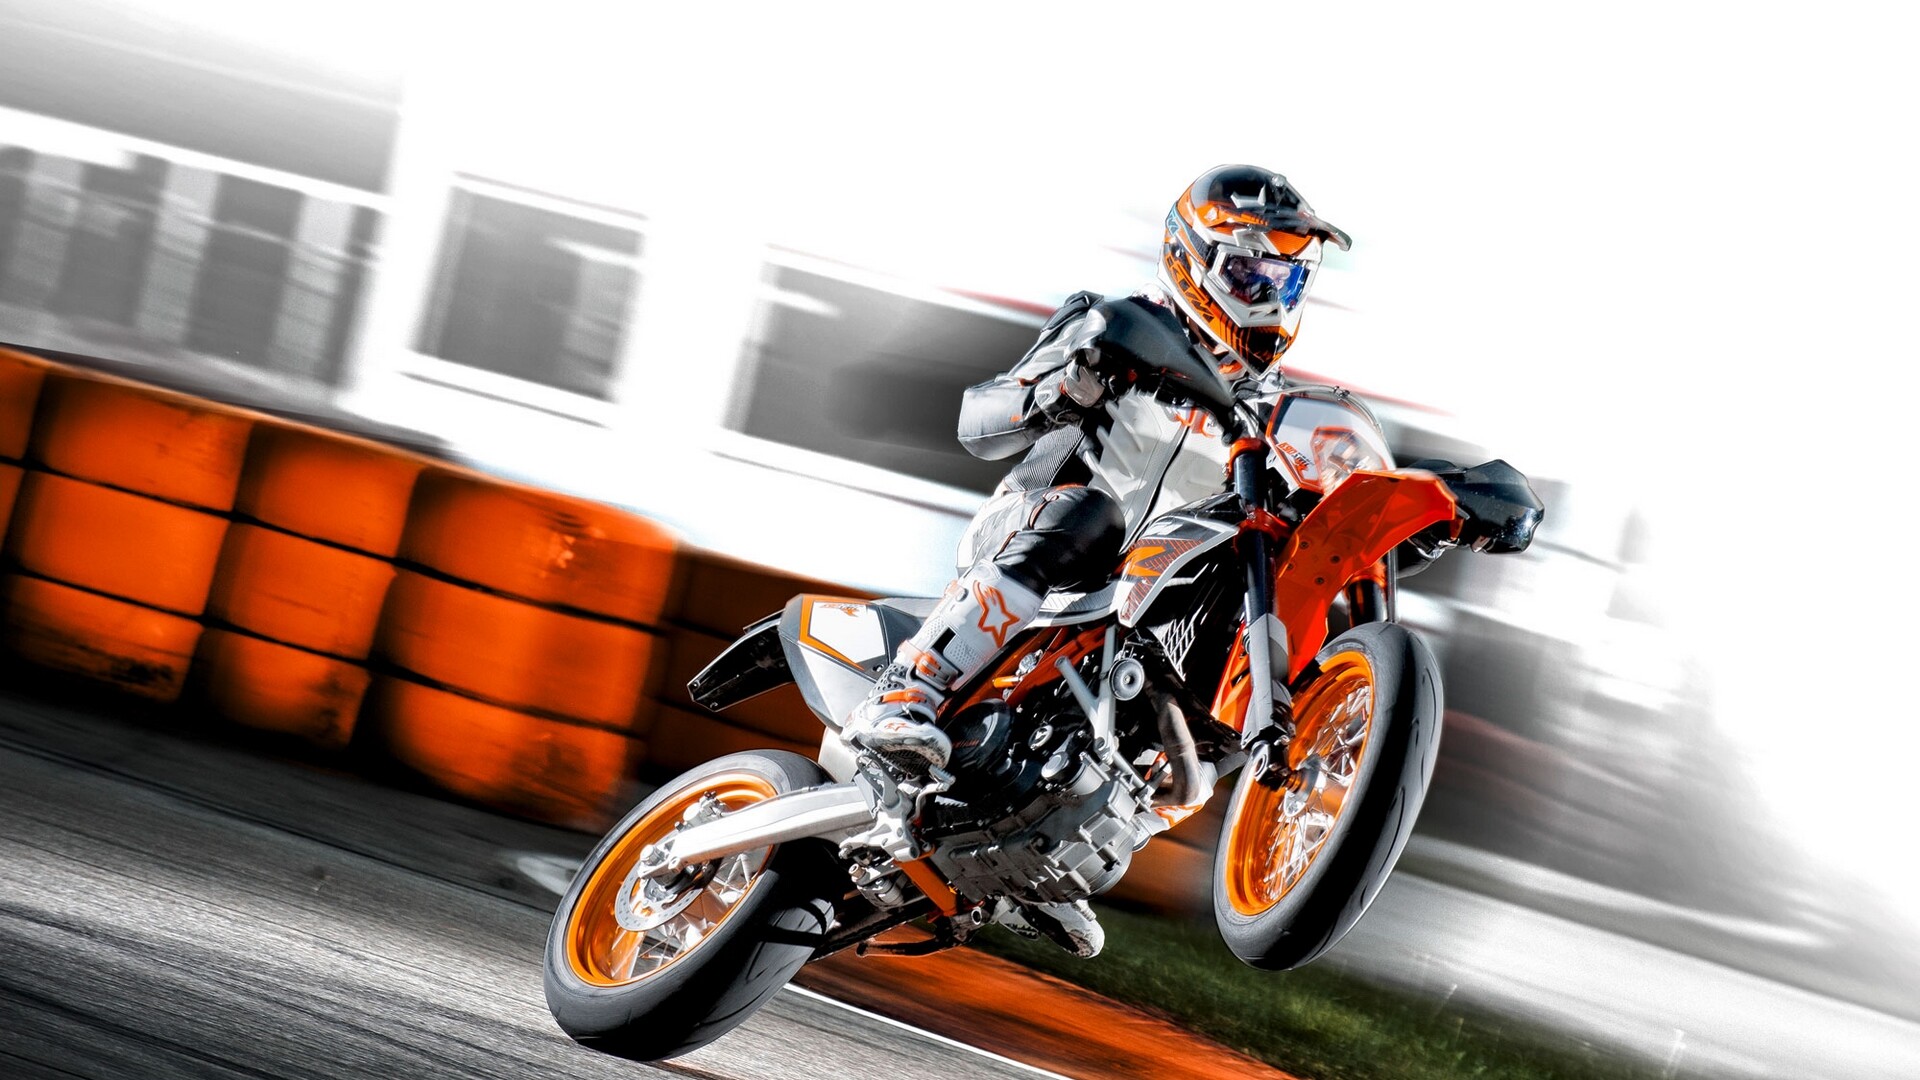 Wide range of KTM wallpapers, Varied styles, High-quality images, Motorcycle fans, 1920x1080 Full HD Desktop